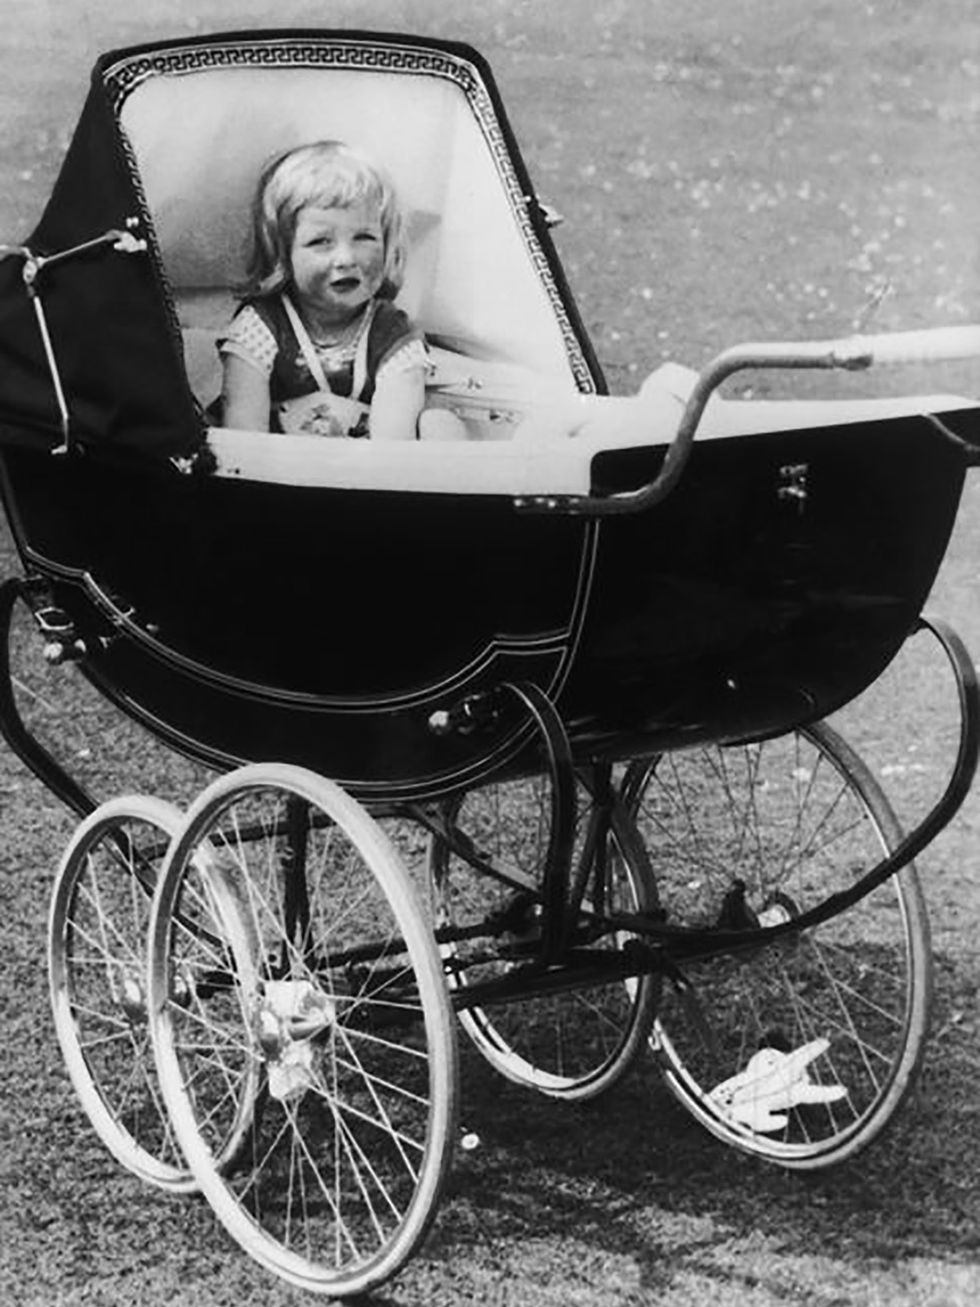 Baby carriage, Product, Baby Products, Vehicle, Black-and-white, Monochrome, Carriage, Photography, Car, Wheel, 